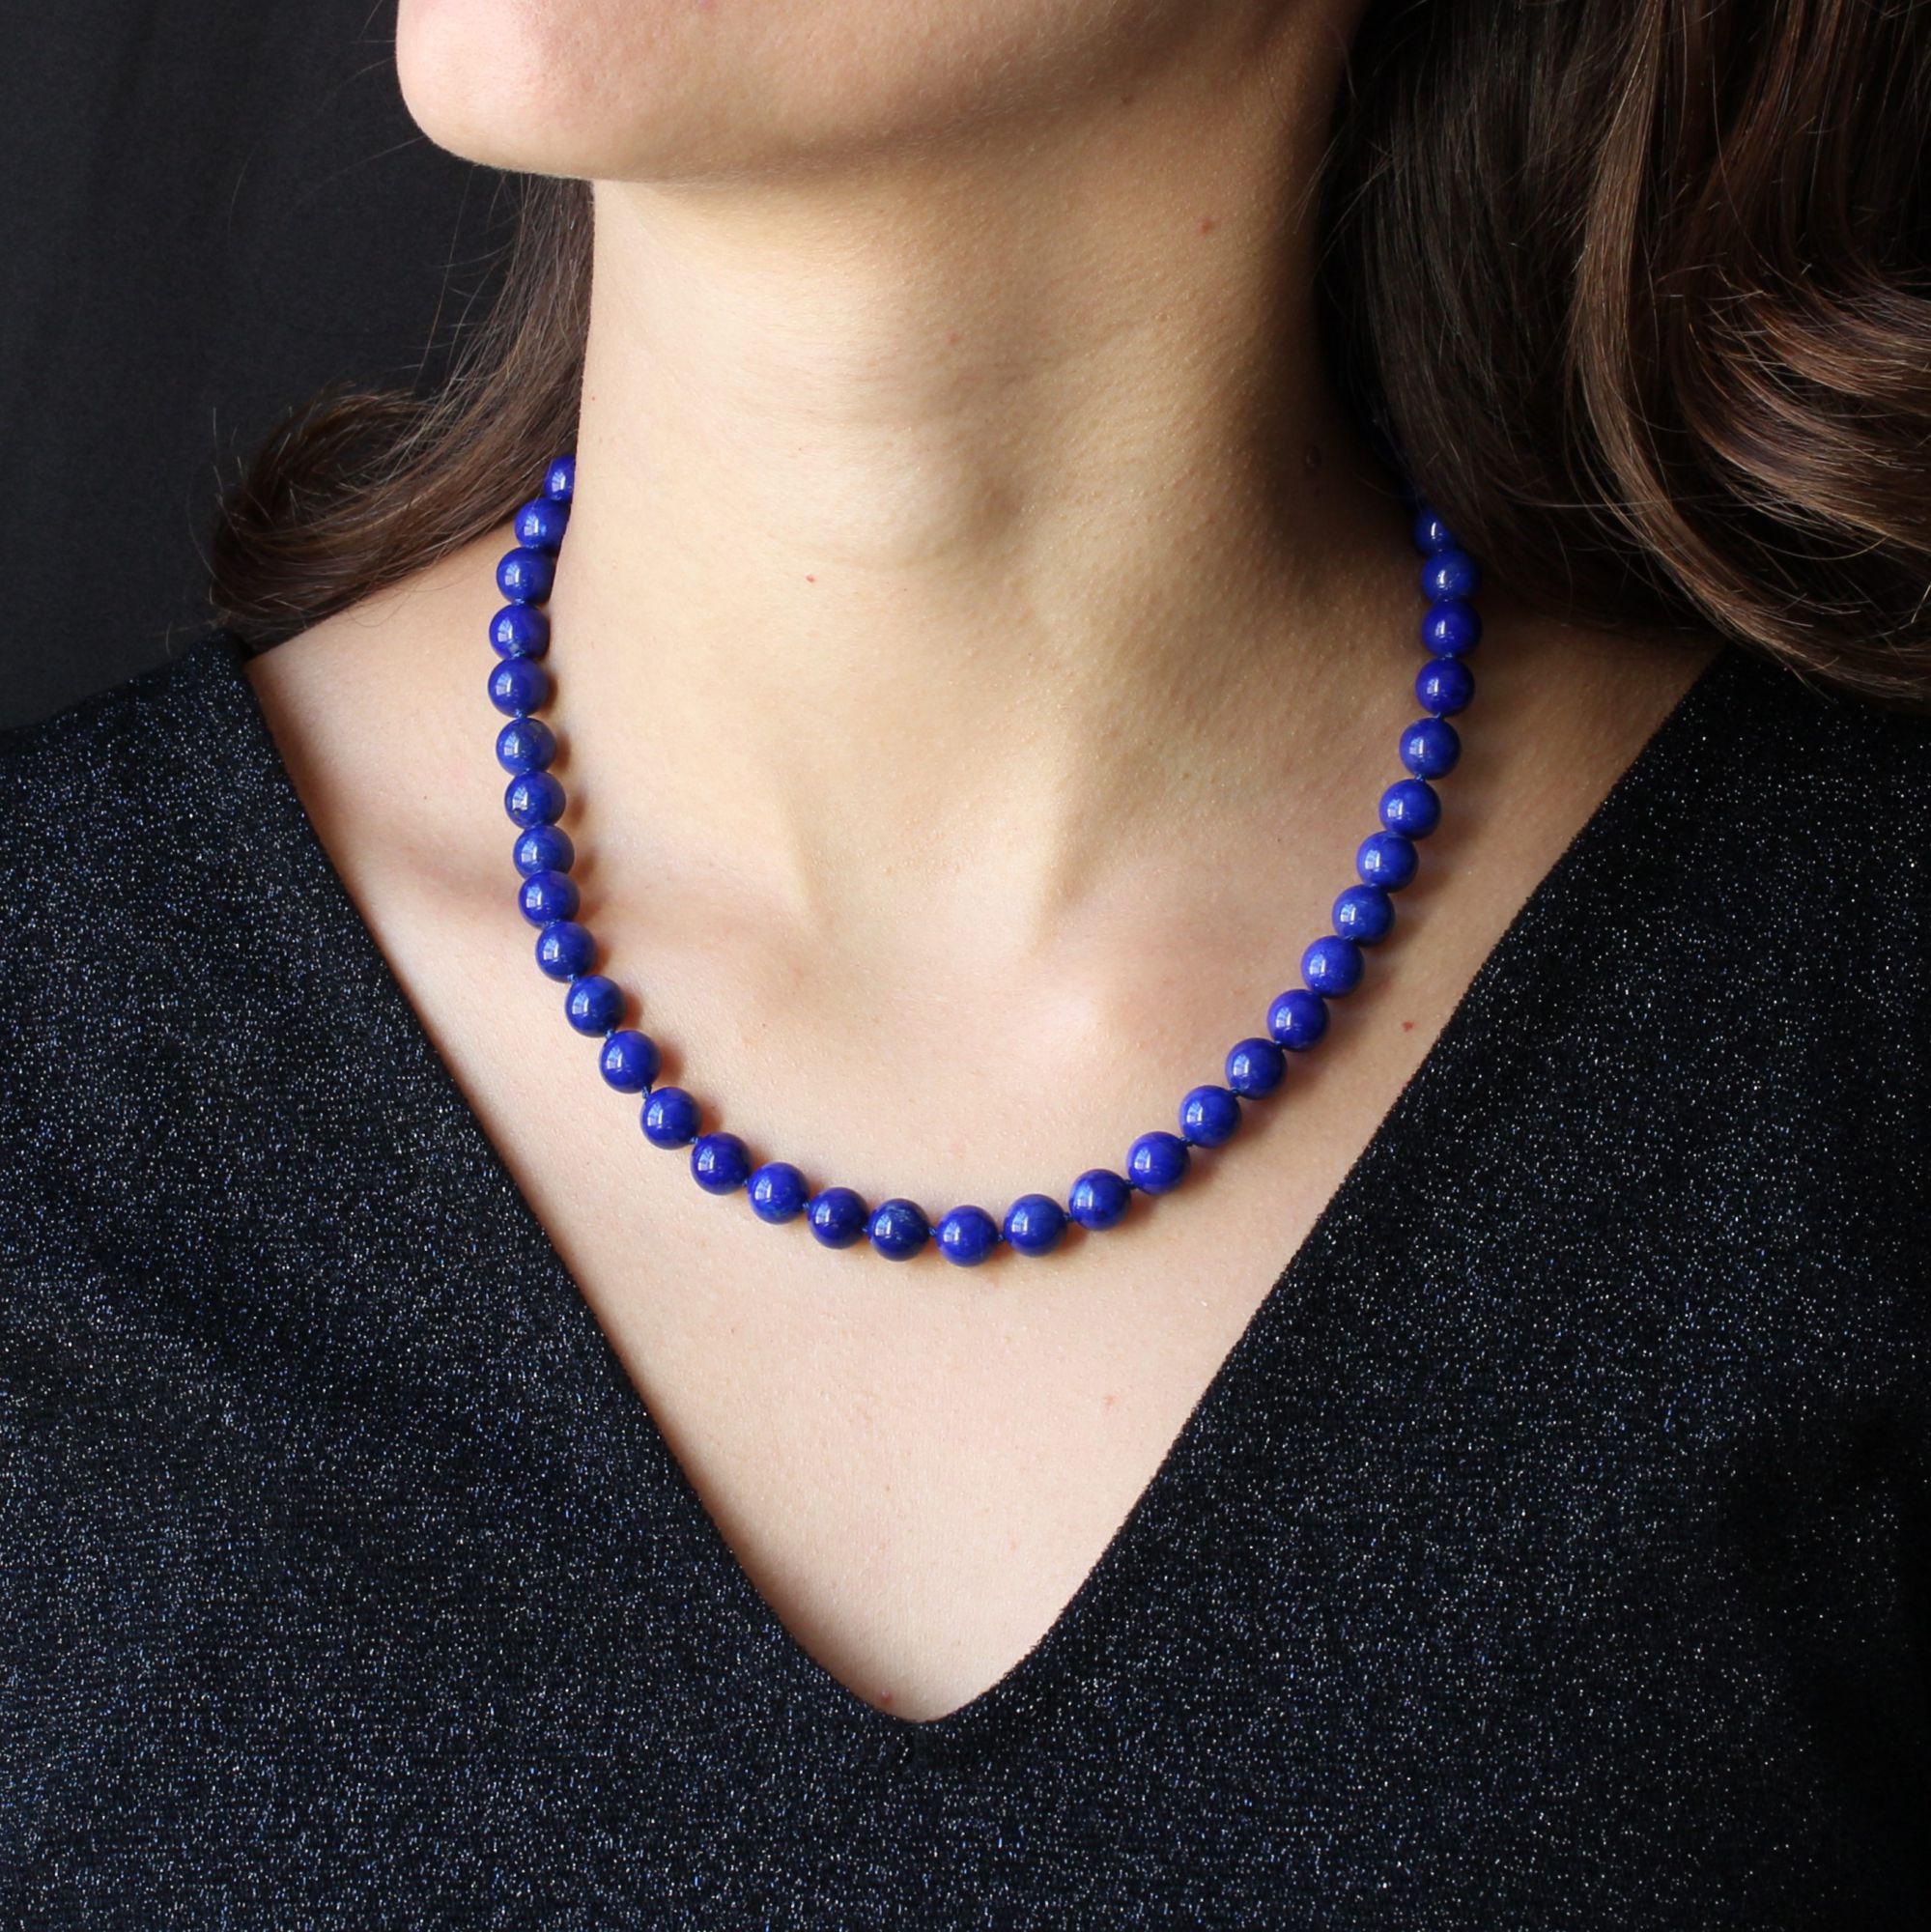 Baume Creation - Unique piece.
Choker necklace made of lapis lazuli pearls. The hanging system is an important 18 karat yellow gold spring ring, chiseled on its two faces.
Length : 46 cm, diameter of the pearls : 8,3 mm approximately.
Total weight